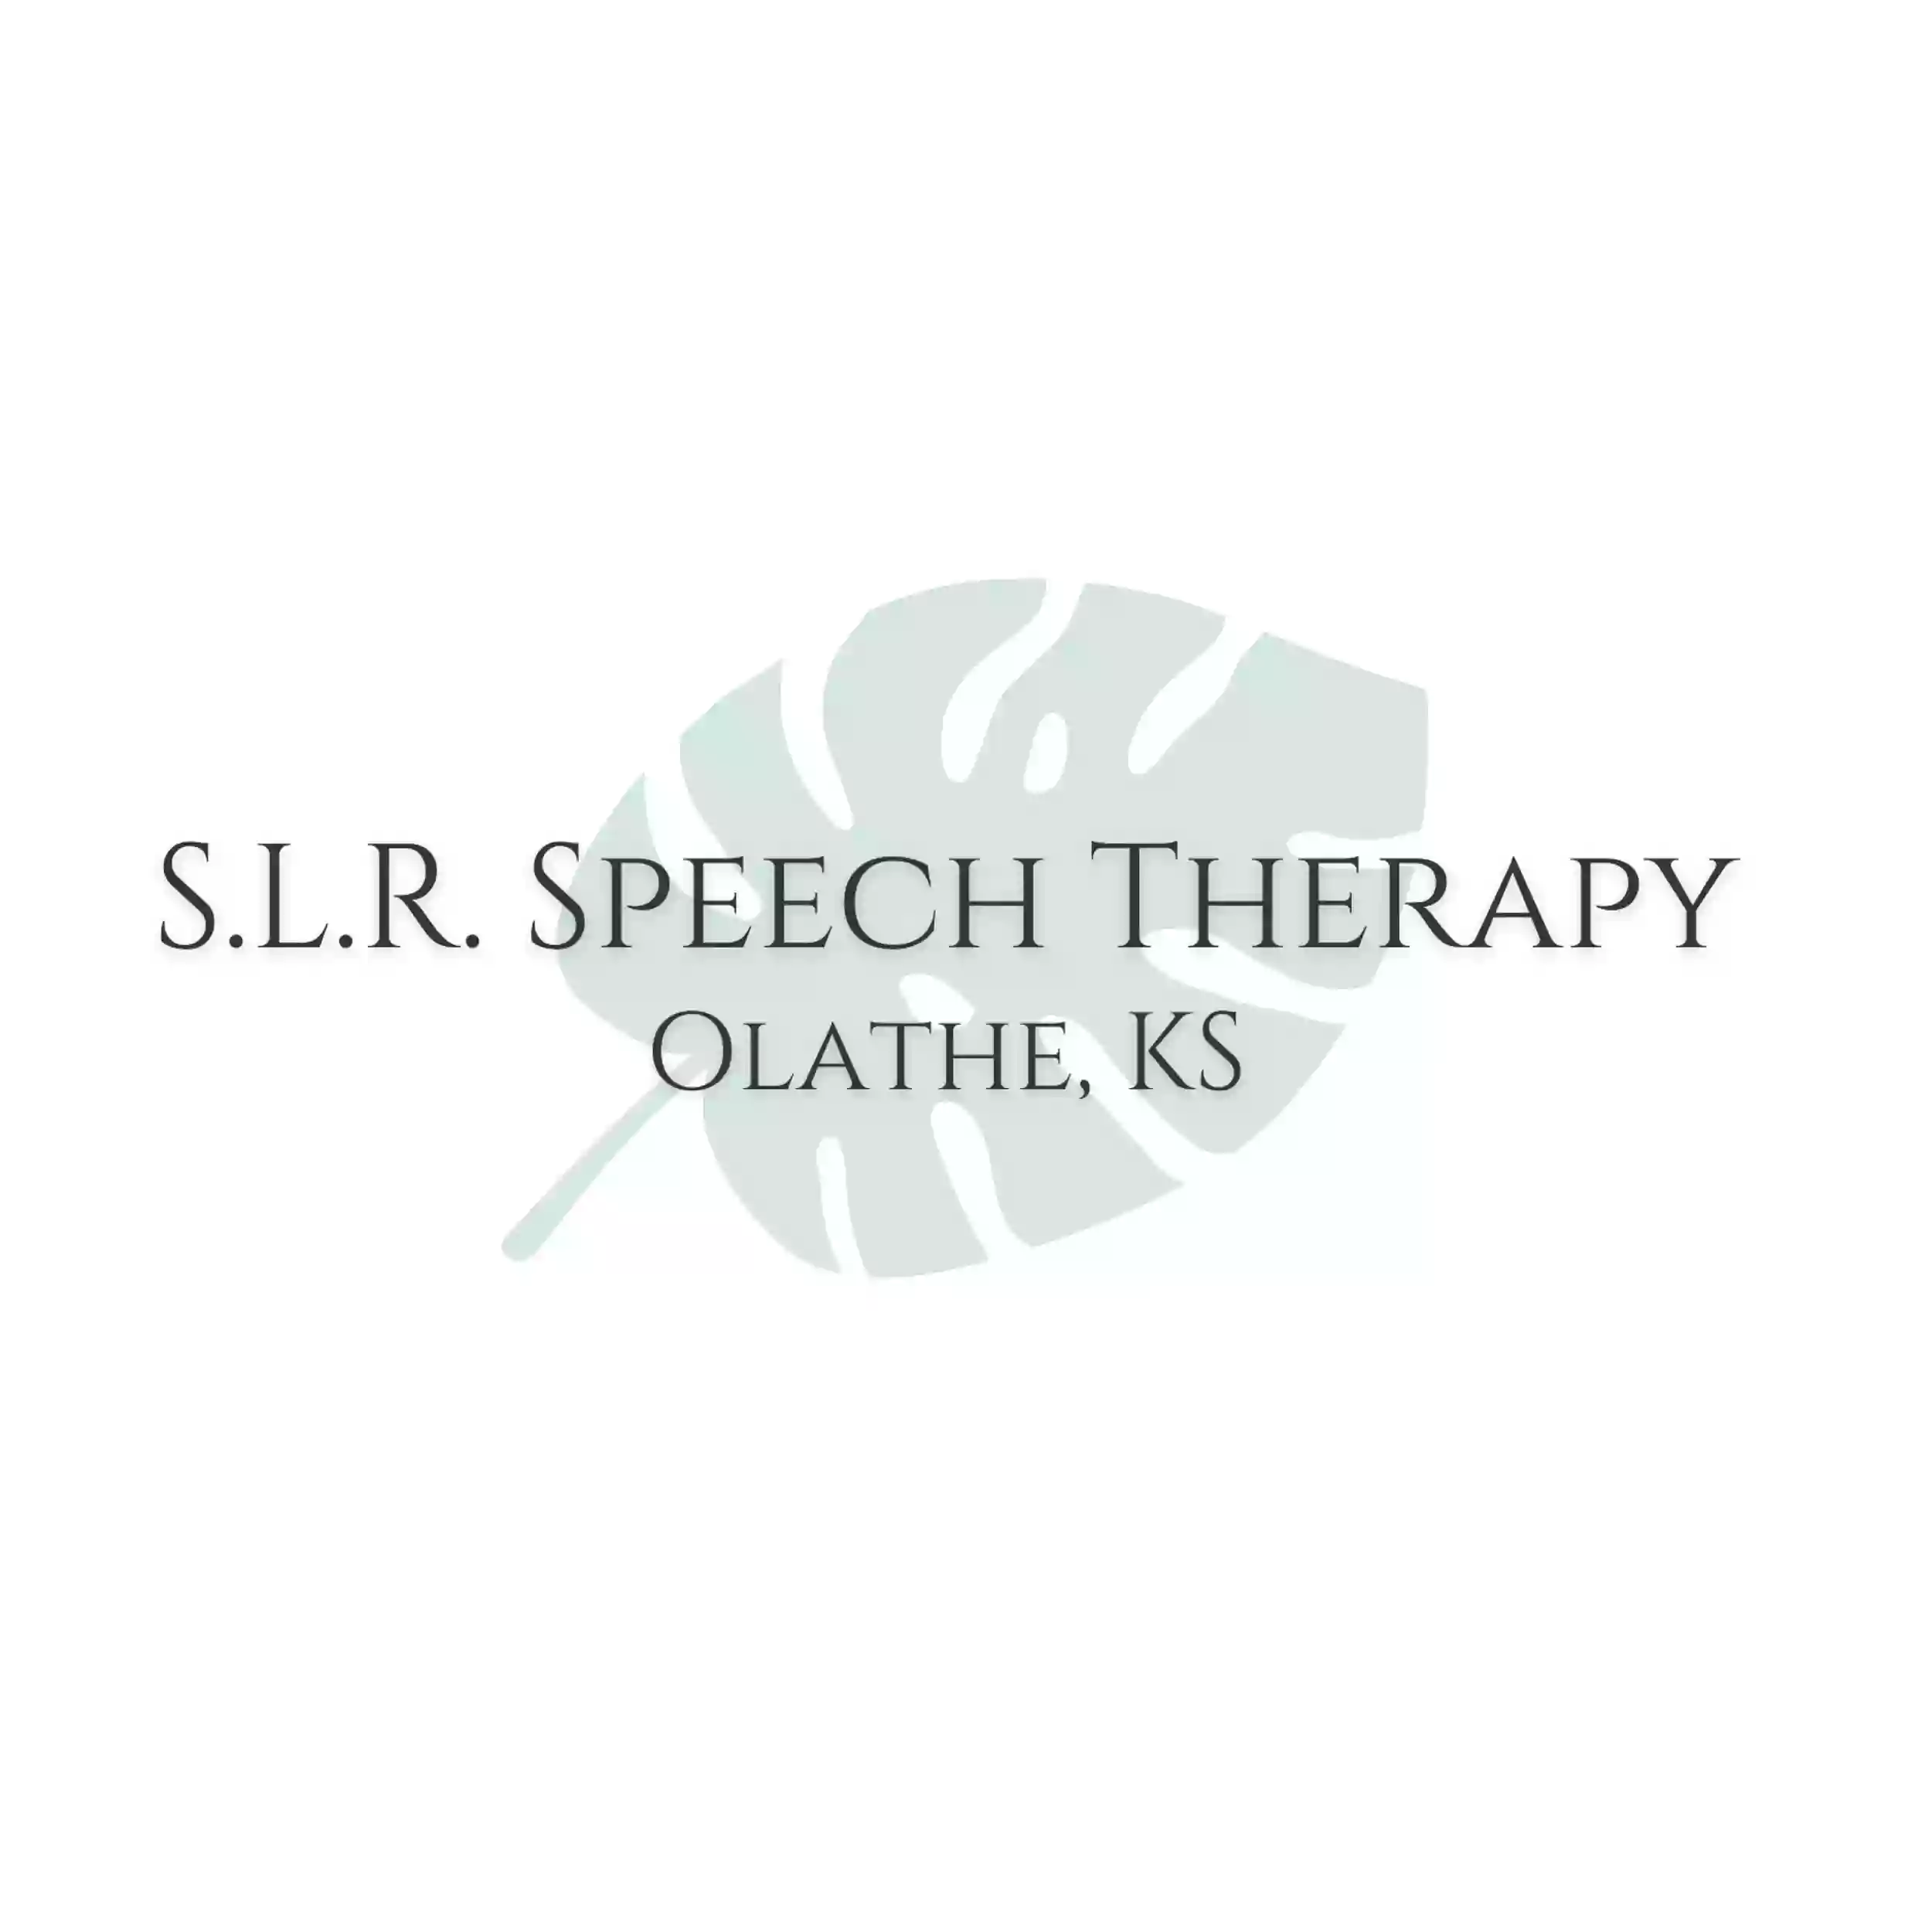 S.L.R. Speech Therapy Services